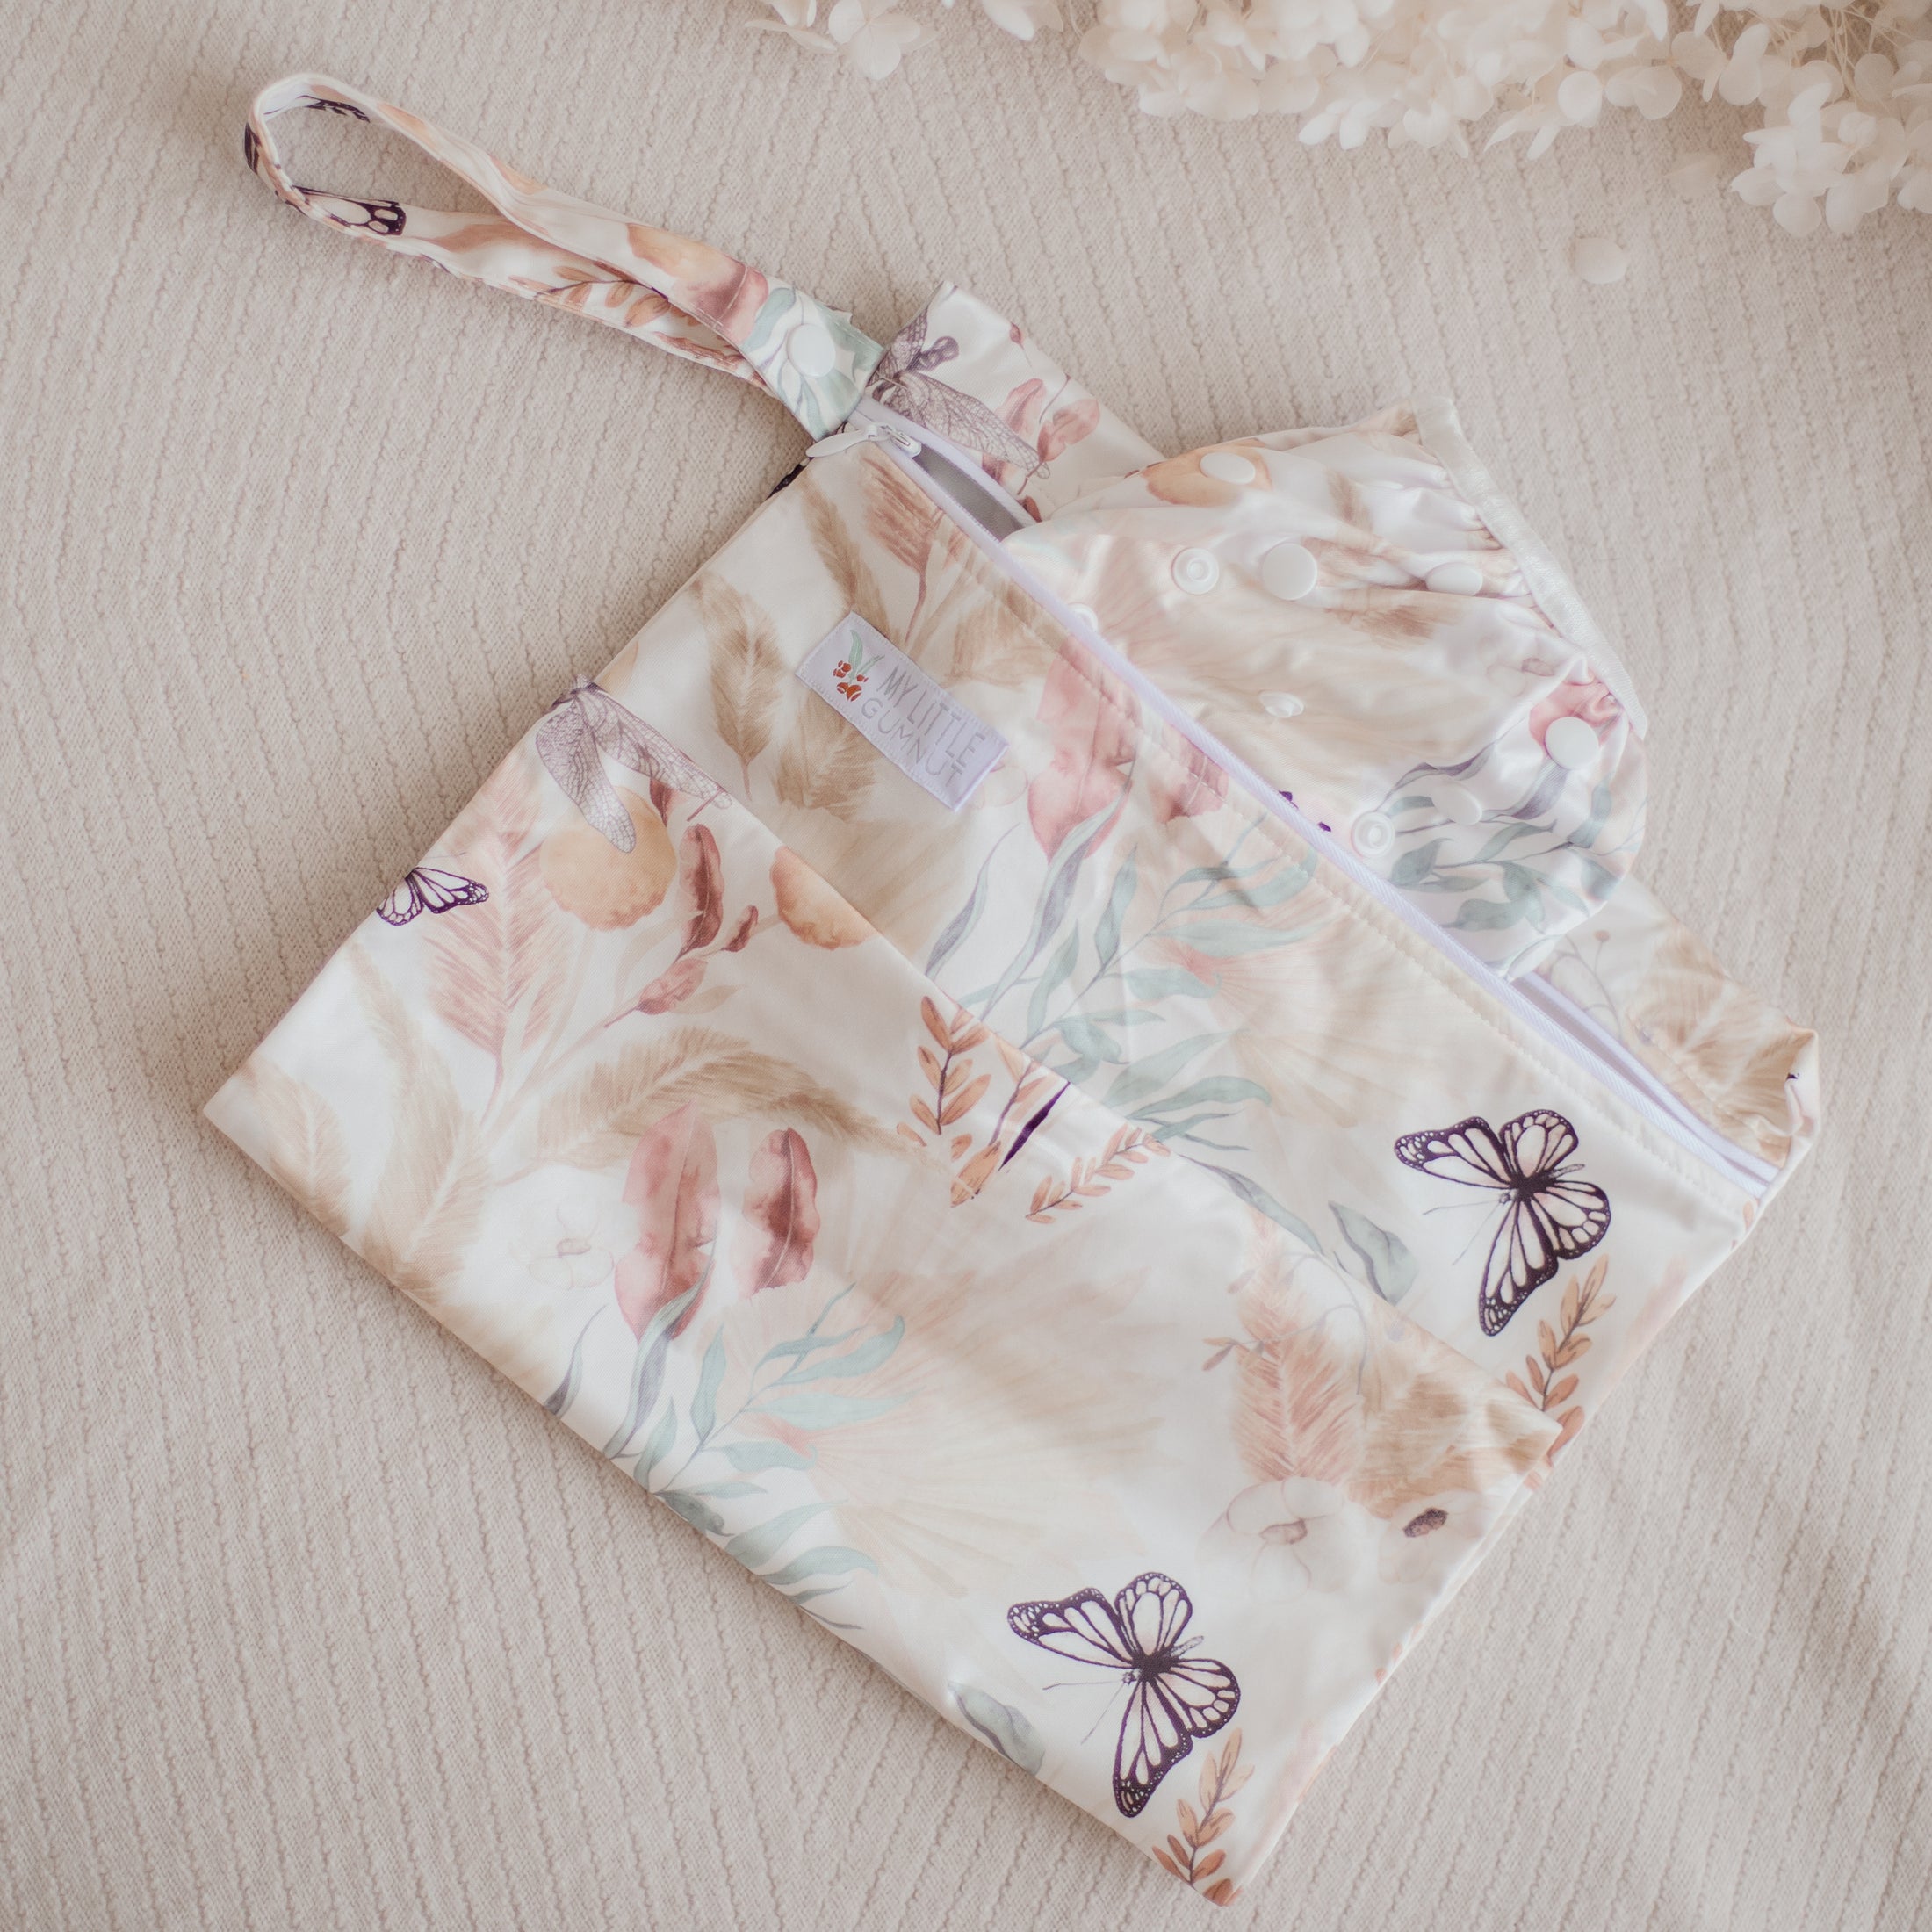 Reusable wet bag with mathcing swim nappy by My Little Gumnut